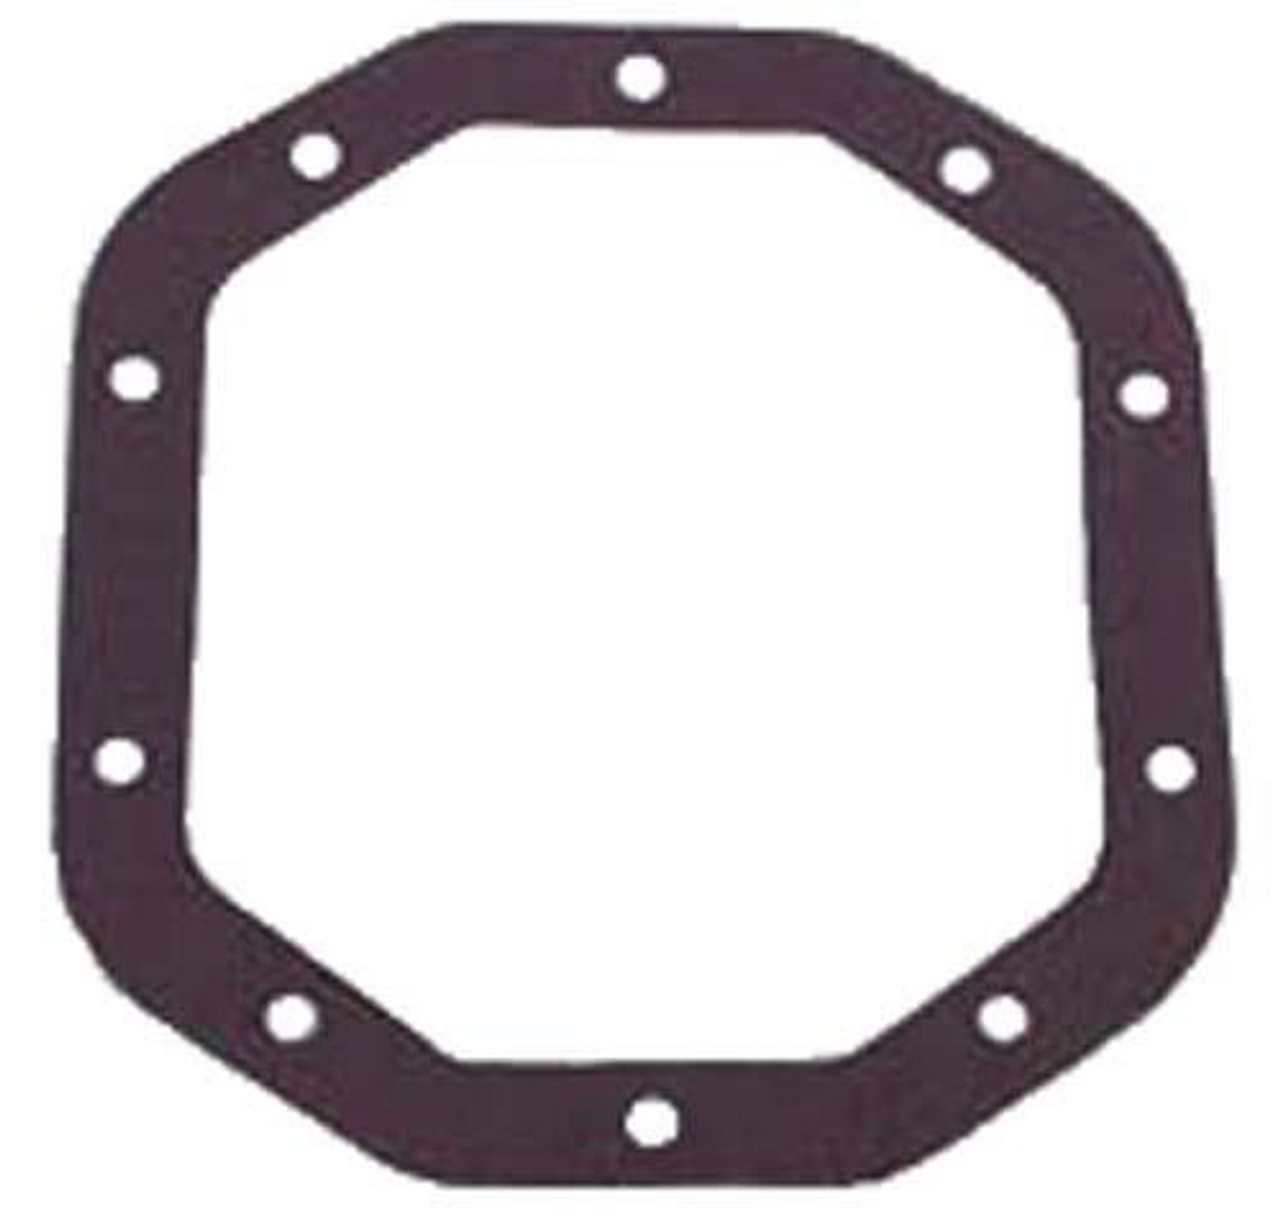 E-Z-GO Differential Gasket (Years 1977-1987), 4729, 15054-G1